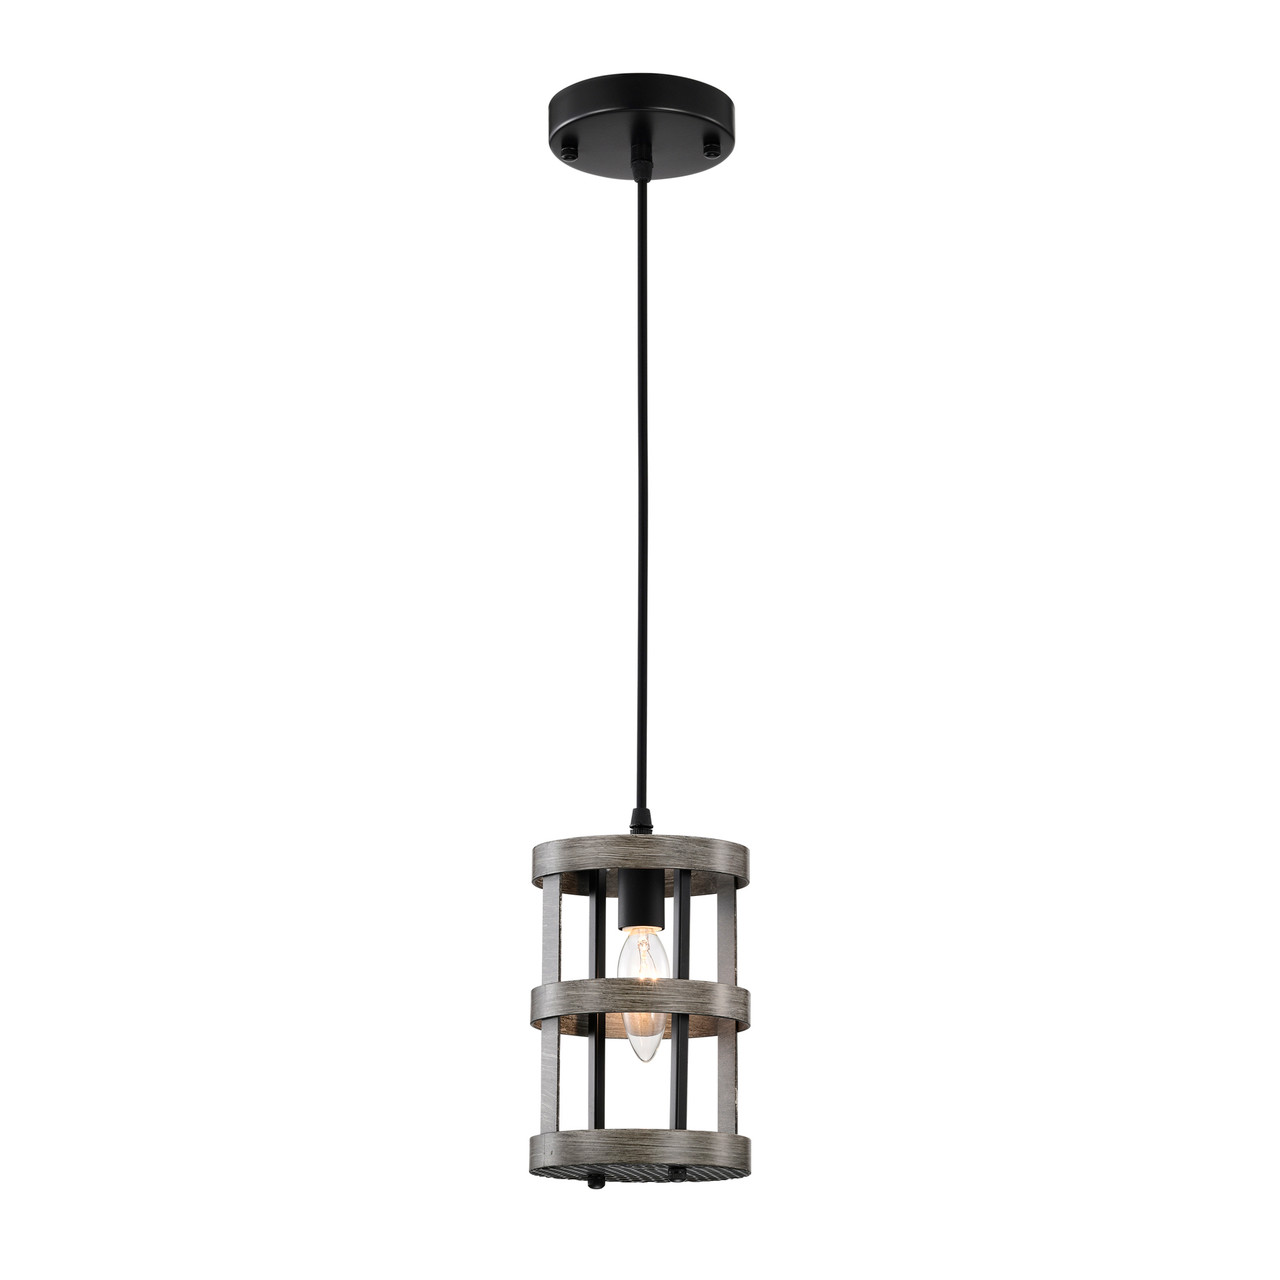 WAREHOUSE OF TIFFANY'S MD144/1 Dania 5 in. 1-Light Indoor Matte Black and Faux Wood Grain Finish Pendant Light with Light Kit